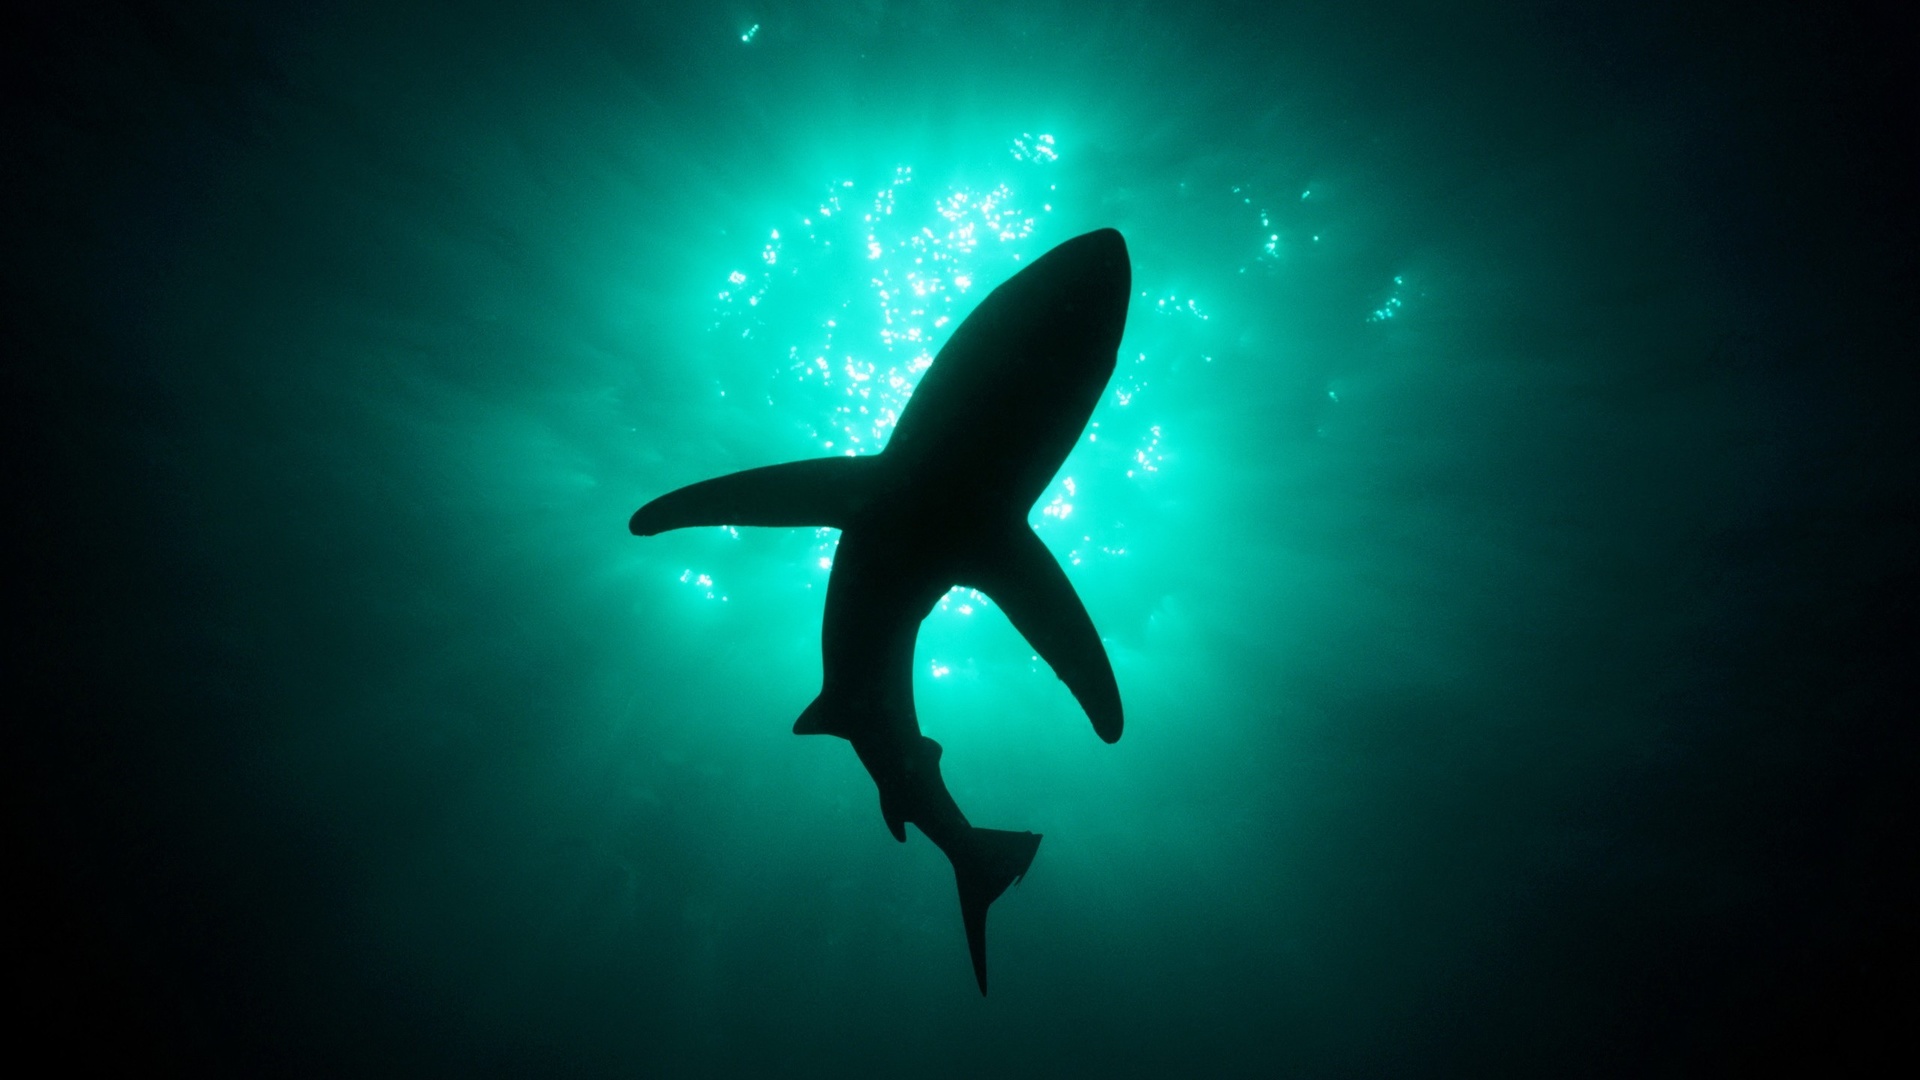 Download Wallpaper Silhouette of shark (1920x1080). The Wallpaper, photo